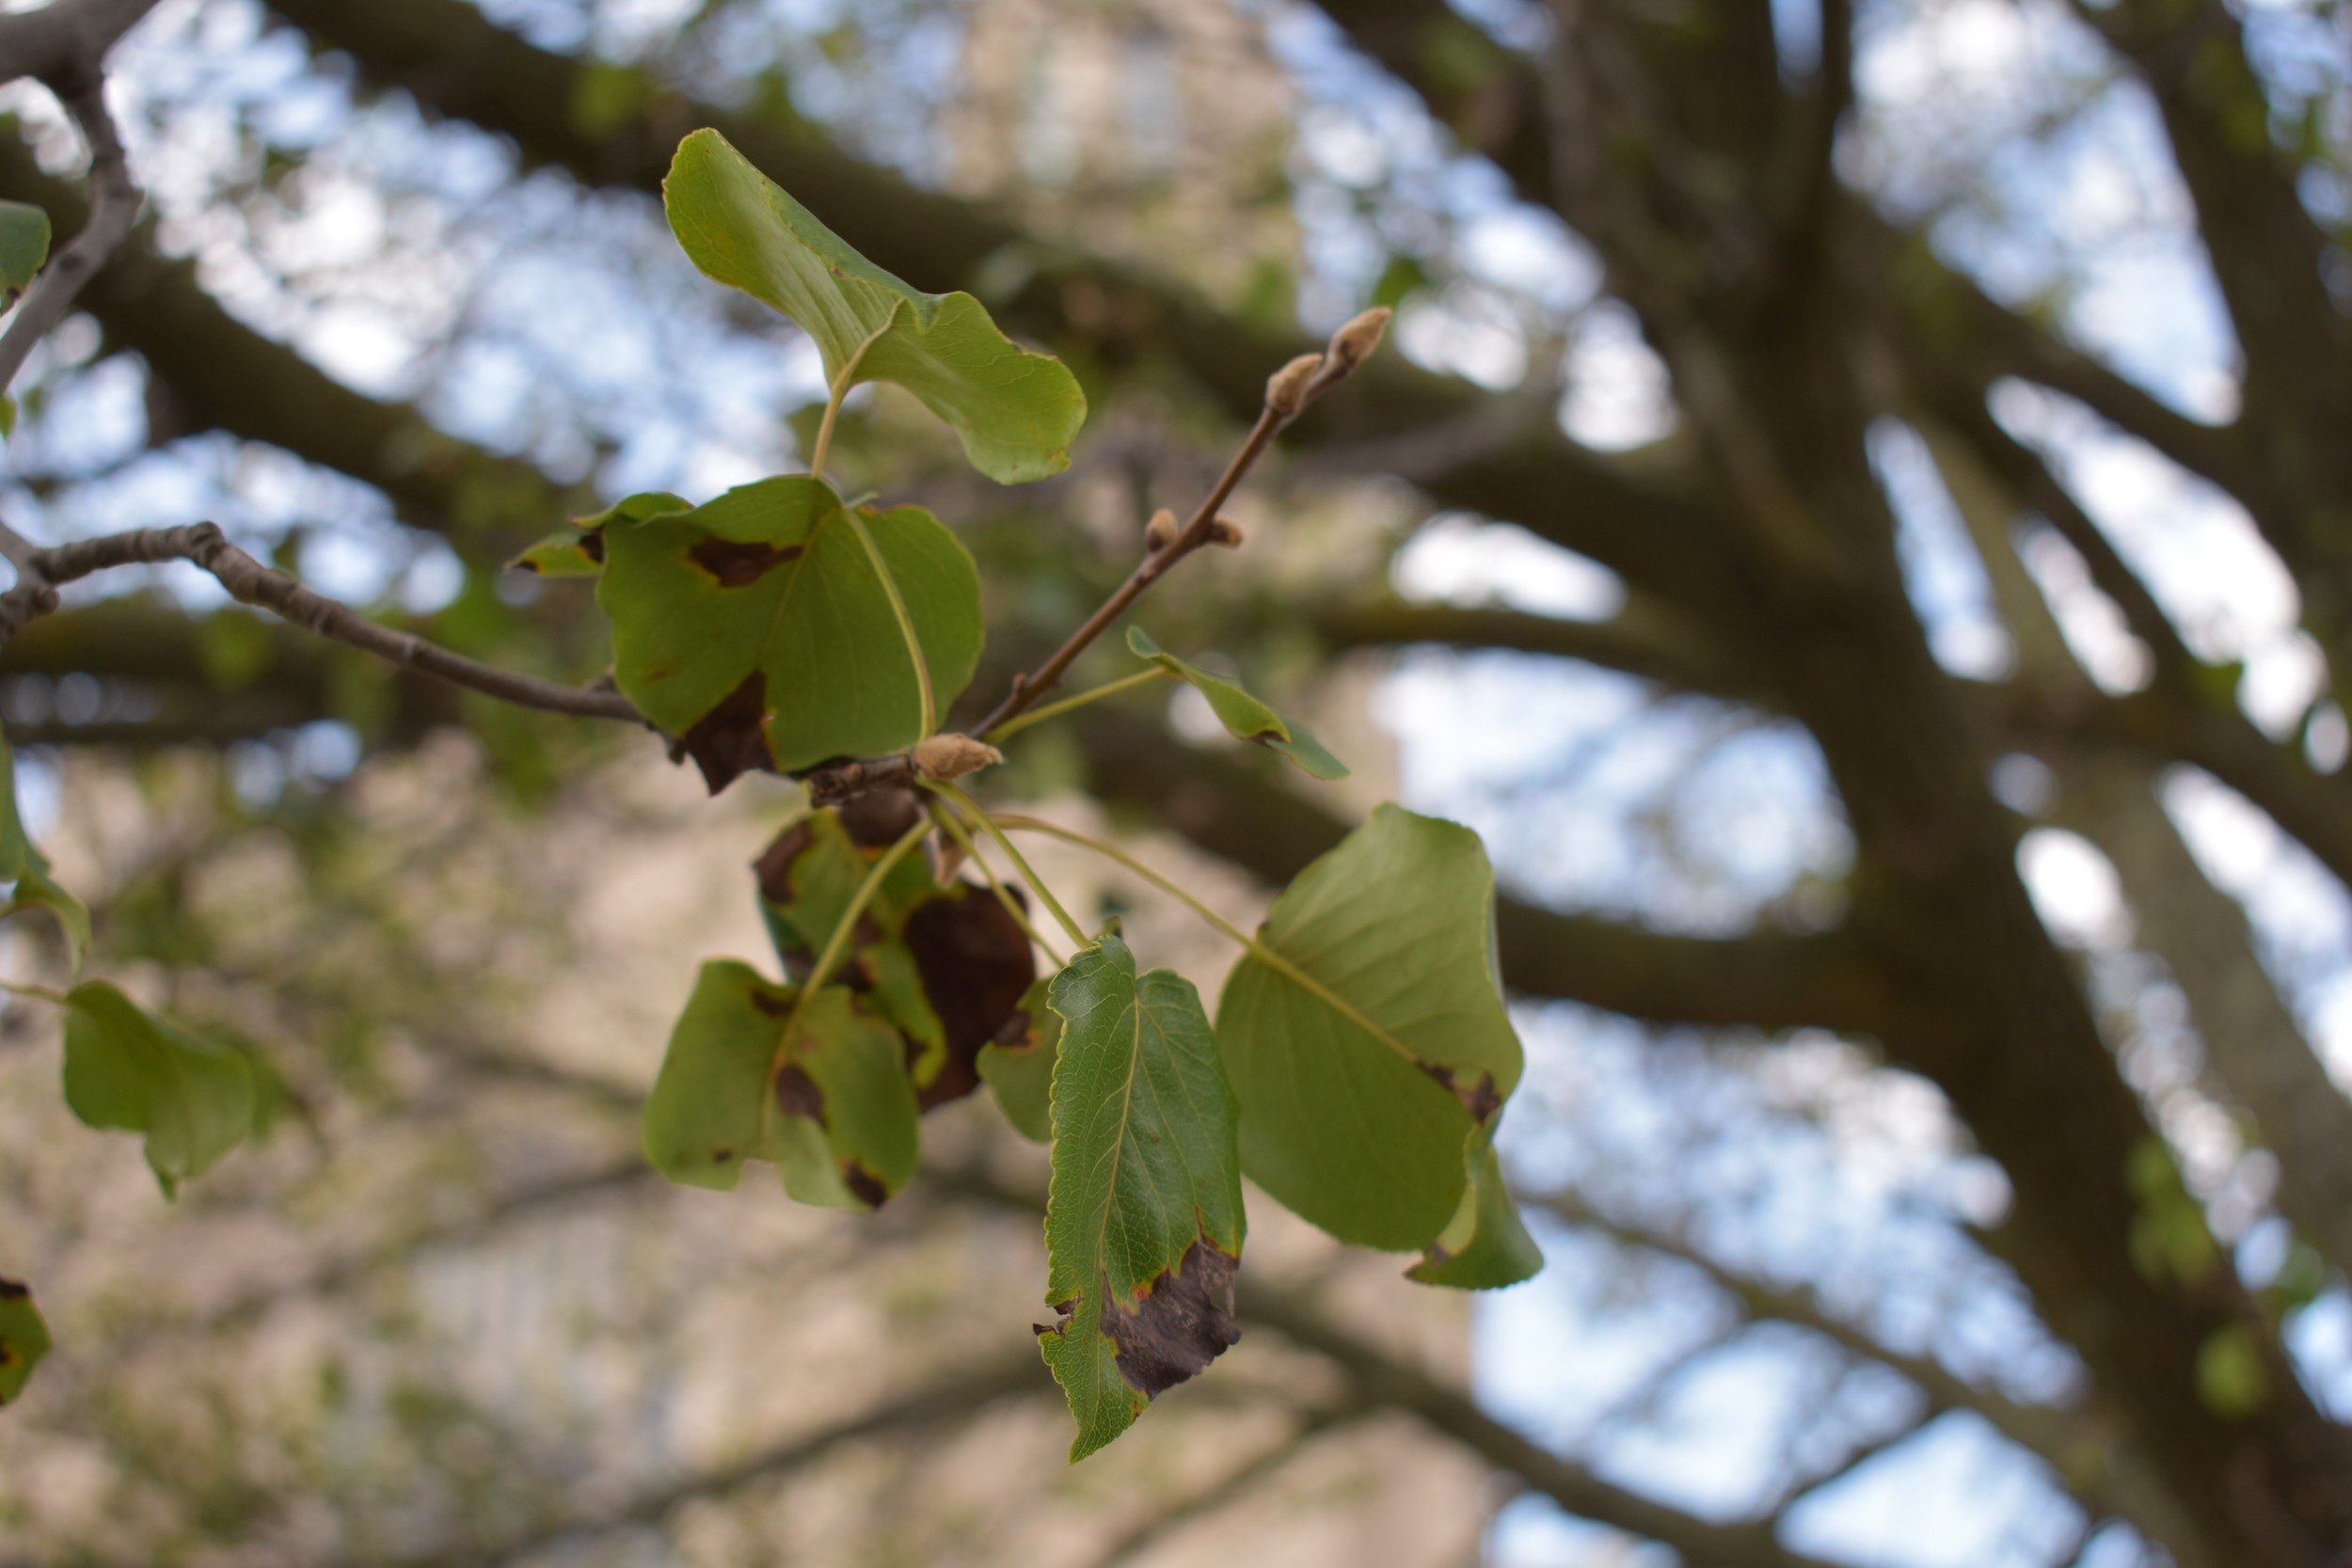 The Curse of the Bradford Pear